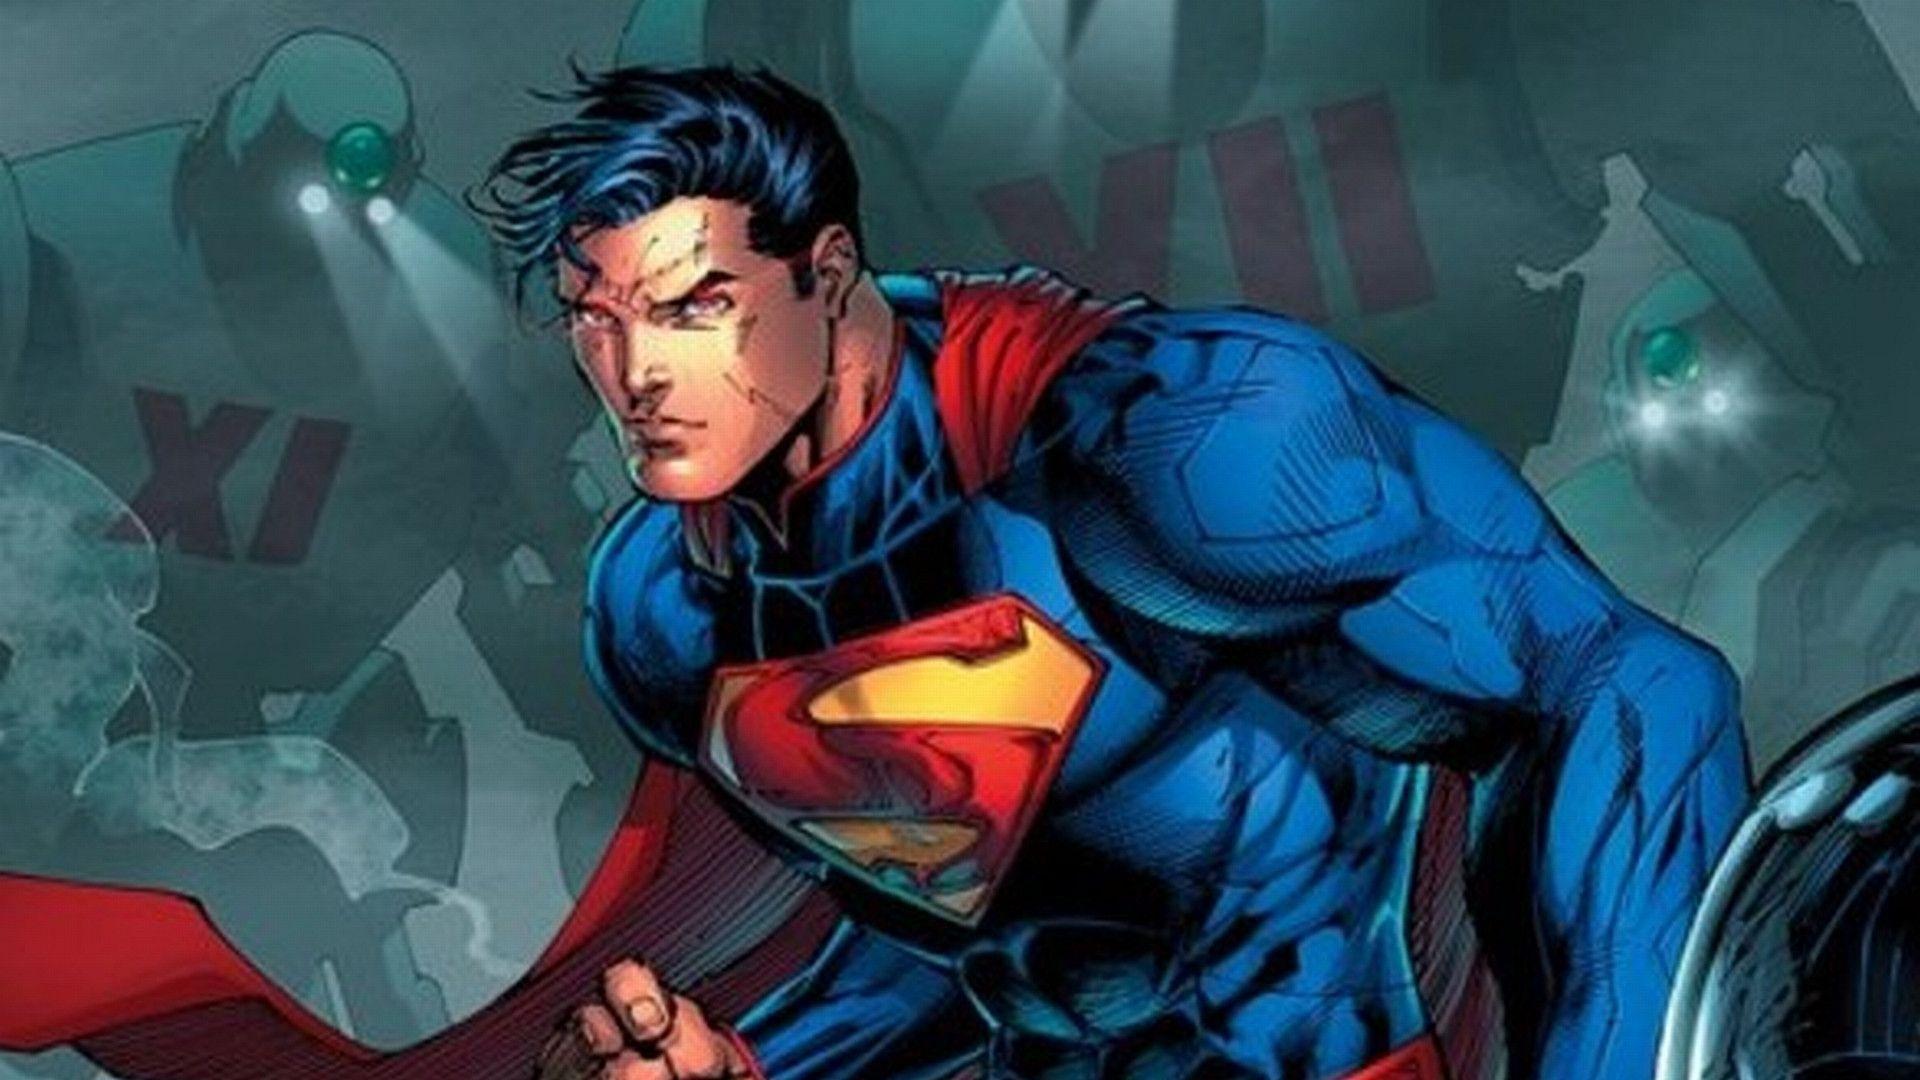 Superman Wallpaper HD For Android